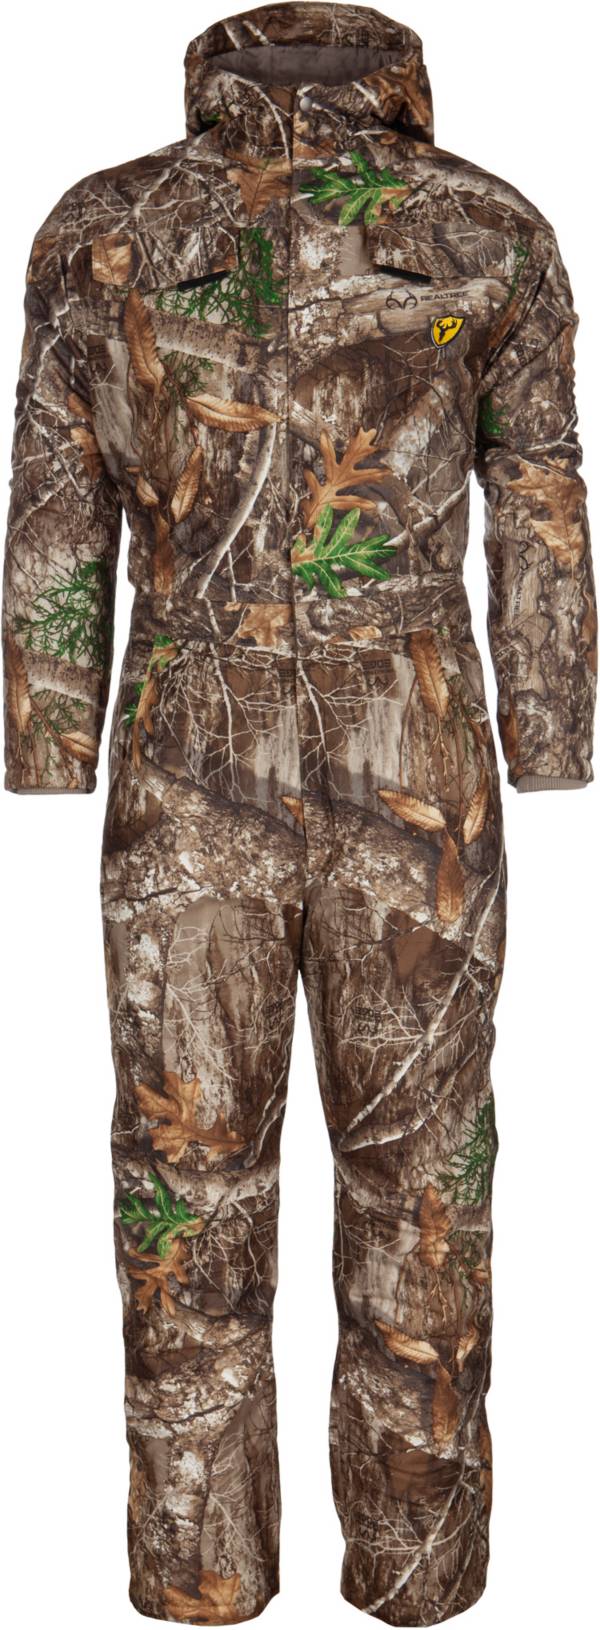 Blocker Outdoors Drencher Series Men's Insulated Coverall product image